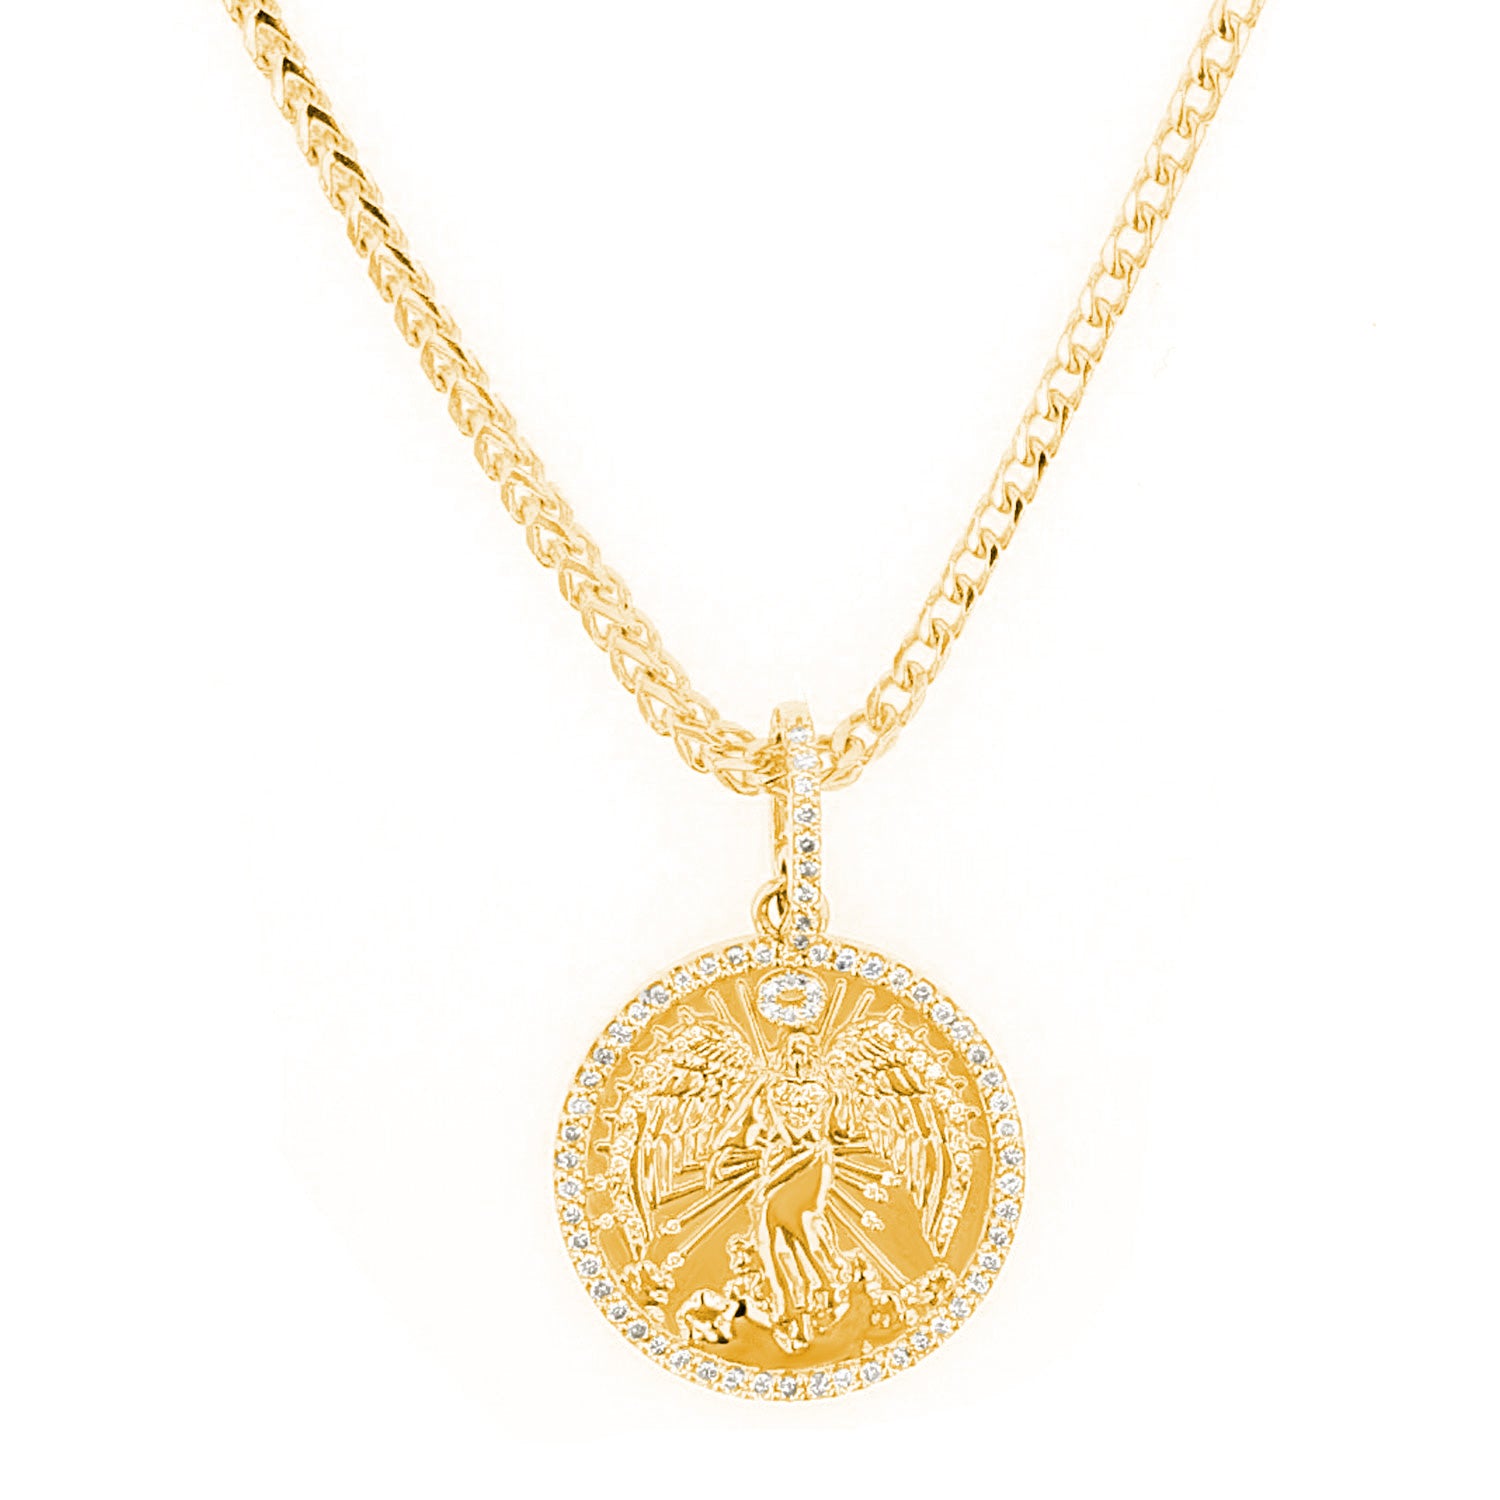 Disc Necklace, Gold Coin Necklace, Coin Jewelry, Delicate Necklace, Gold  Charm, Coin Pendant Necklace, Simple Gold Necklace, Bridesmaid Gift - Etsy